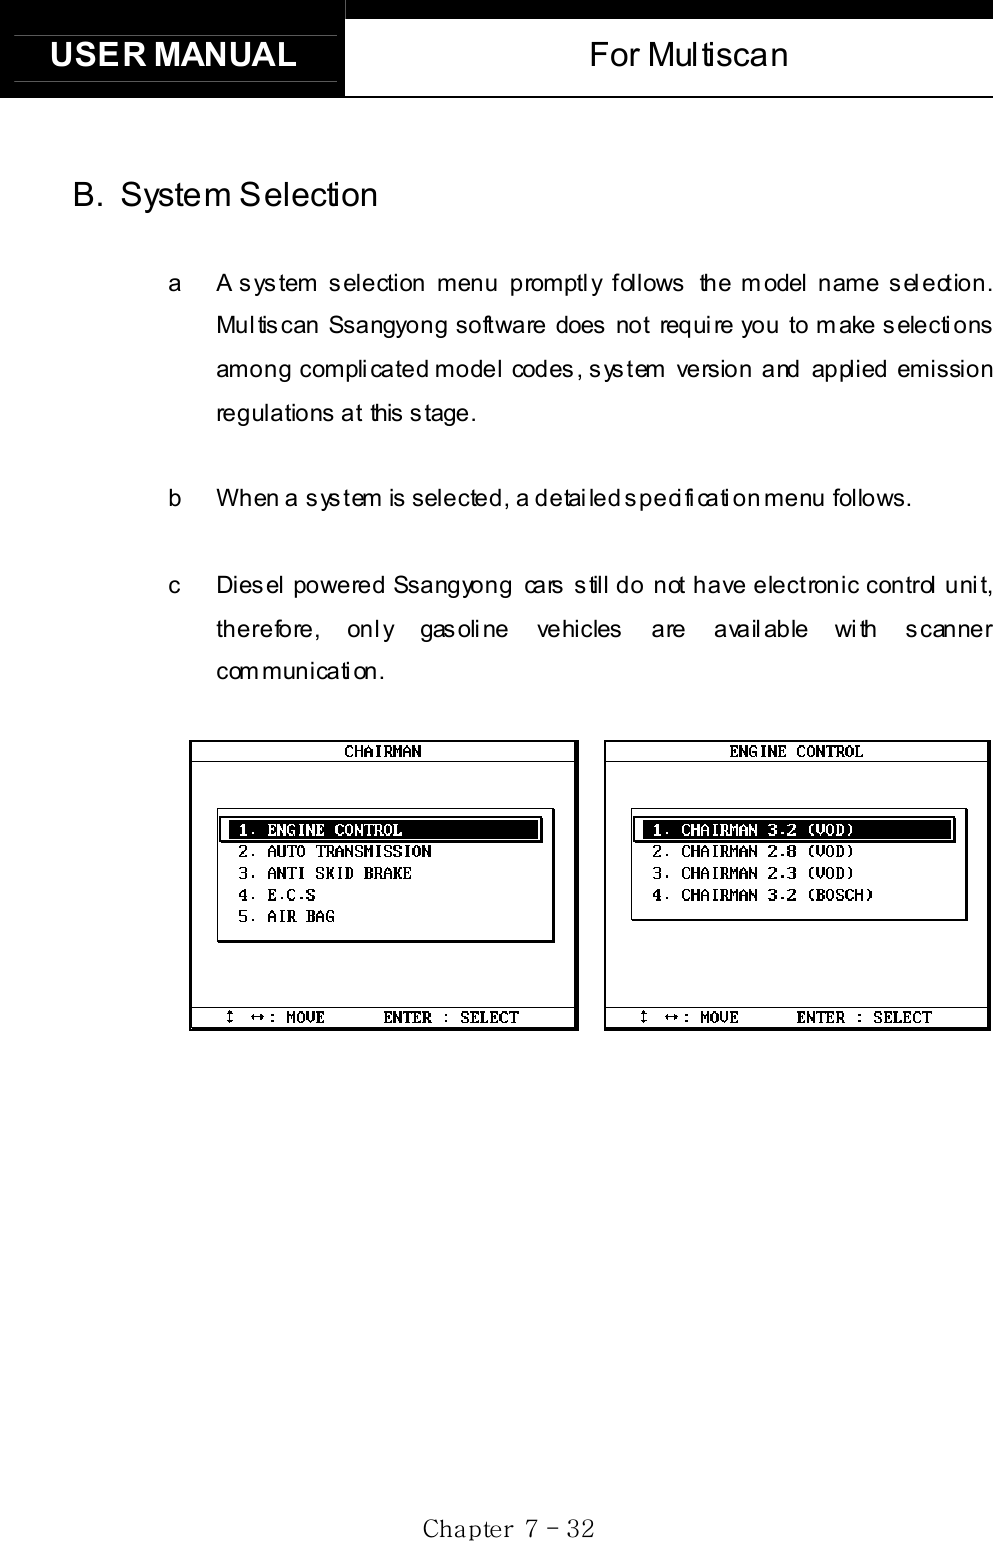 USER MANUAL  For Multiscan Gj  G^G TGZYGB. System Selection  a  A system selection menu promptly follows the model name selection. Multiscan Ssangyong software does  not requi re you to m ake s electi ons among complicated model codes, system version and applied emission regulations at  this stage. b  When a system is selected, a detailed specification menu follows.     c  Diesel  powered Ssangyong  cars still do  not have electronic control unit, therefore, only gasoline vehicles are available with scanner communication. 